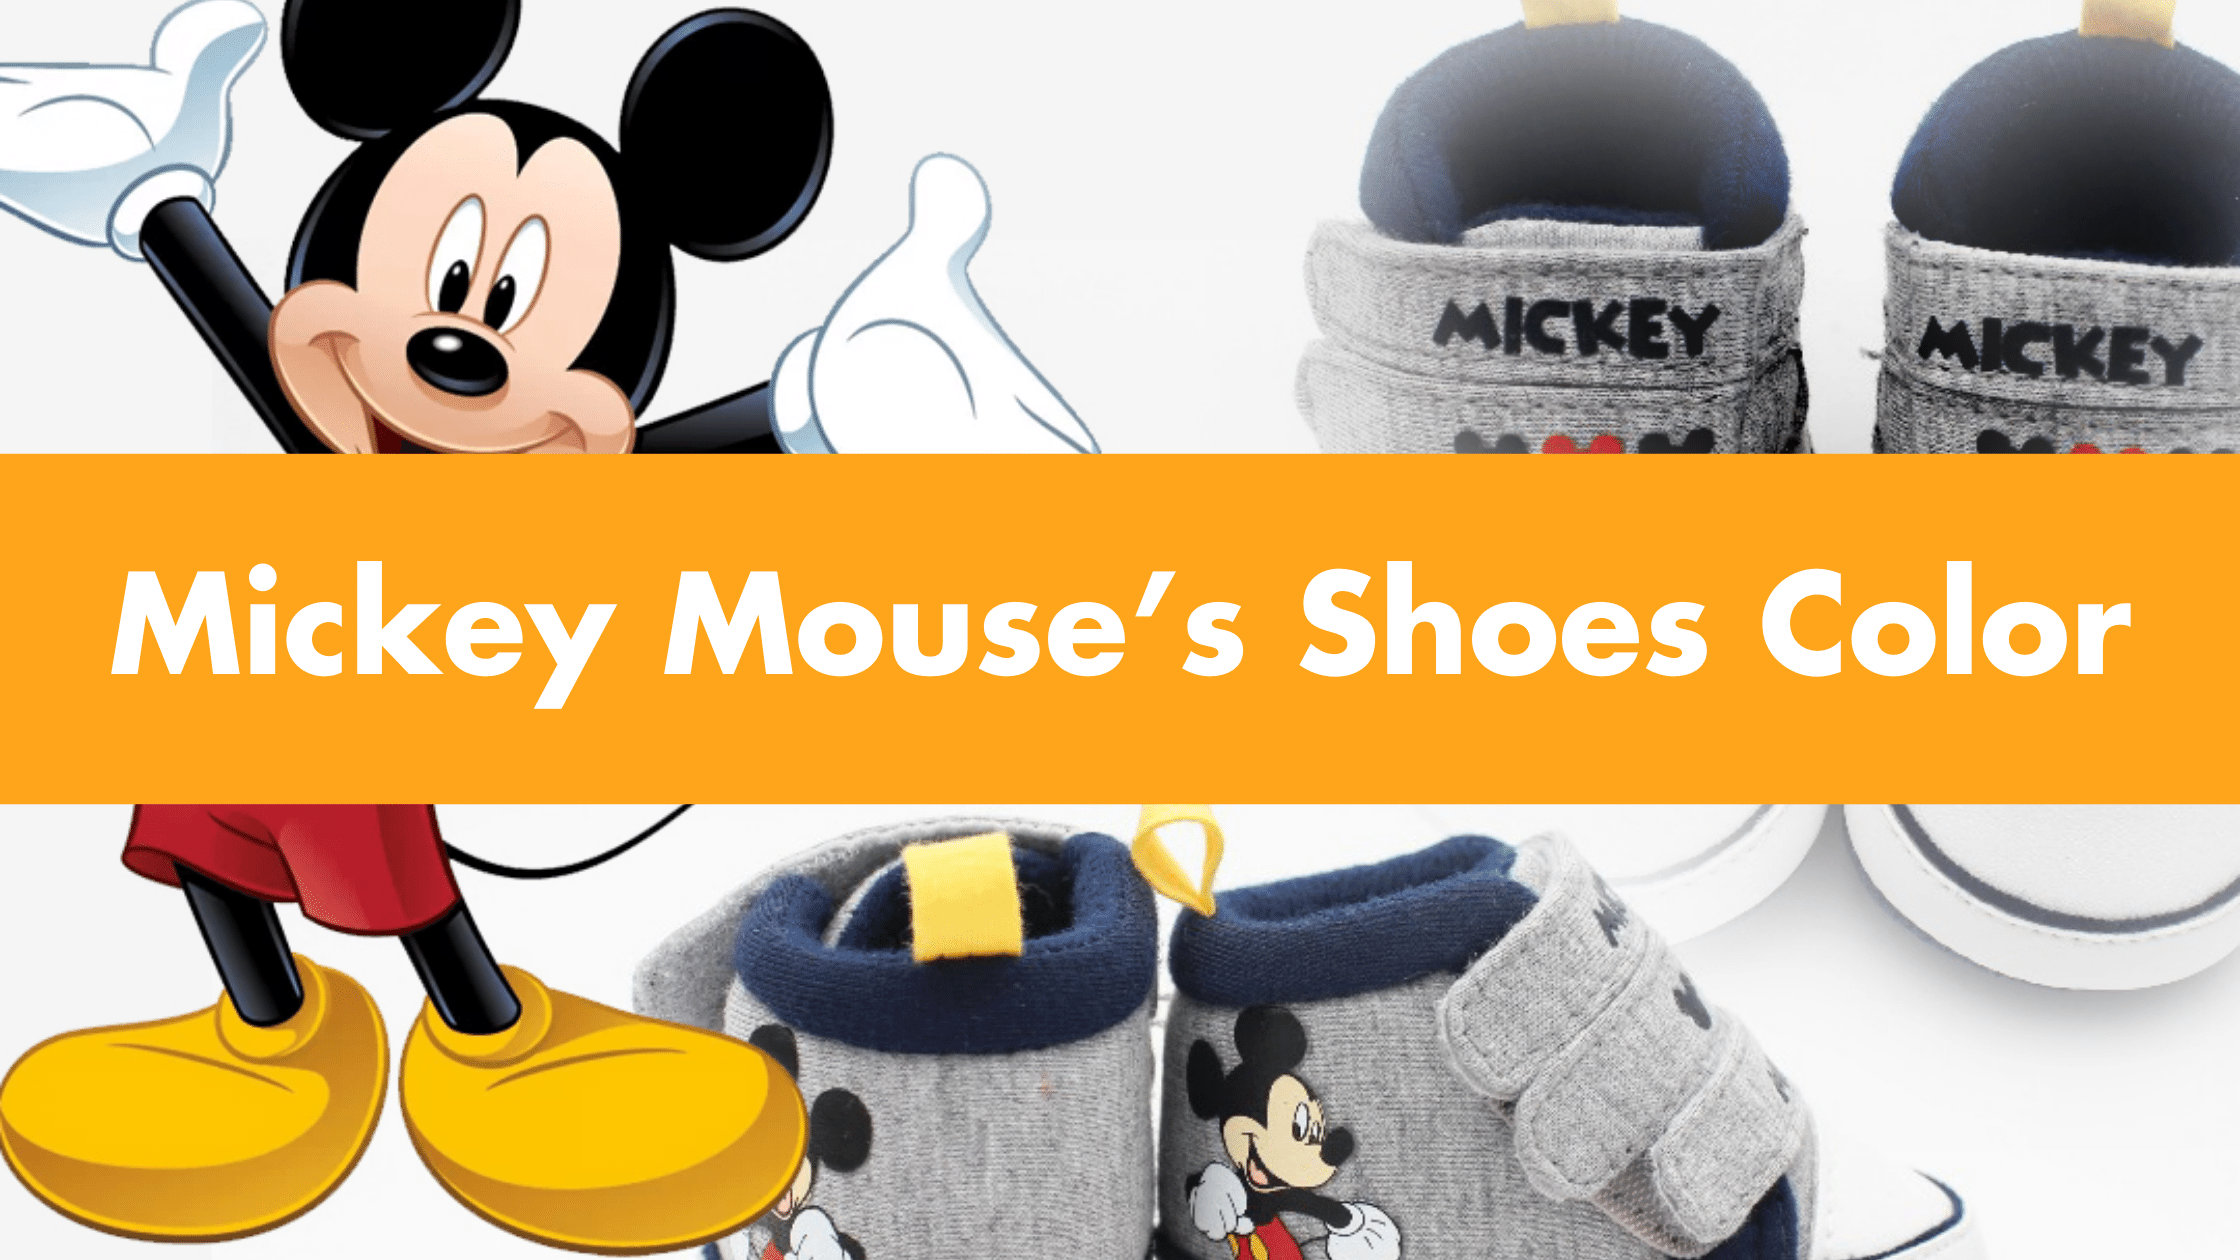 Mickey Mouse’s Shoes Color